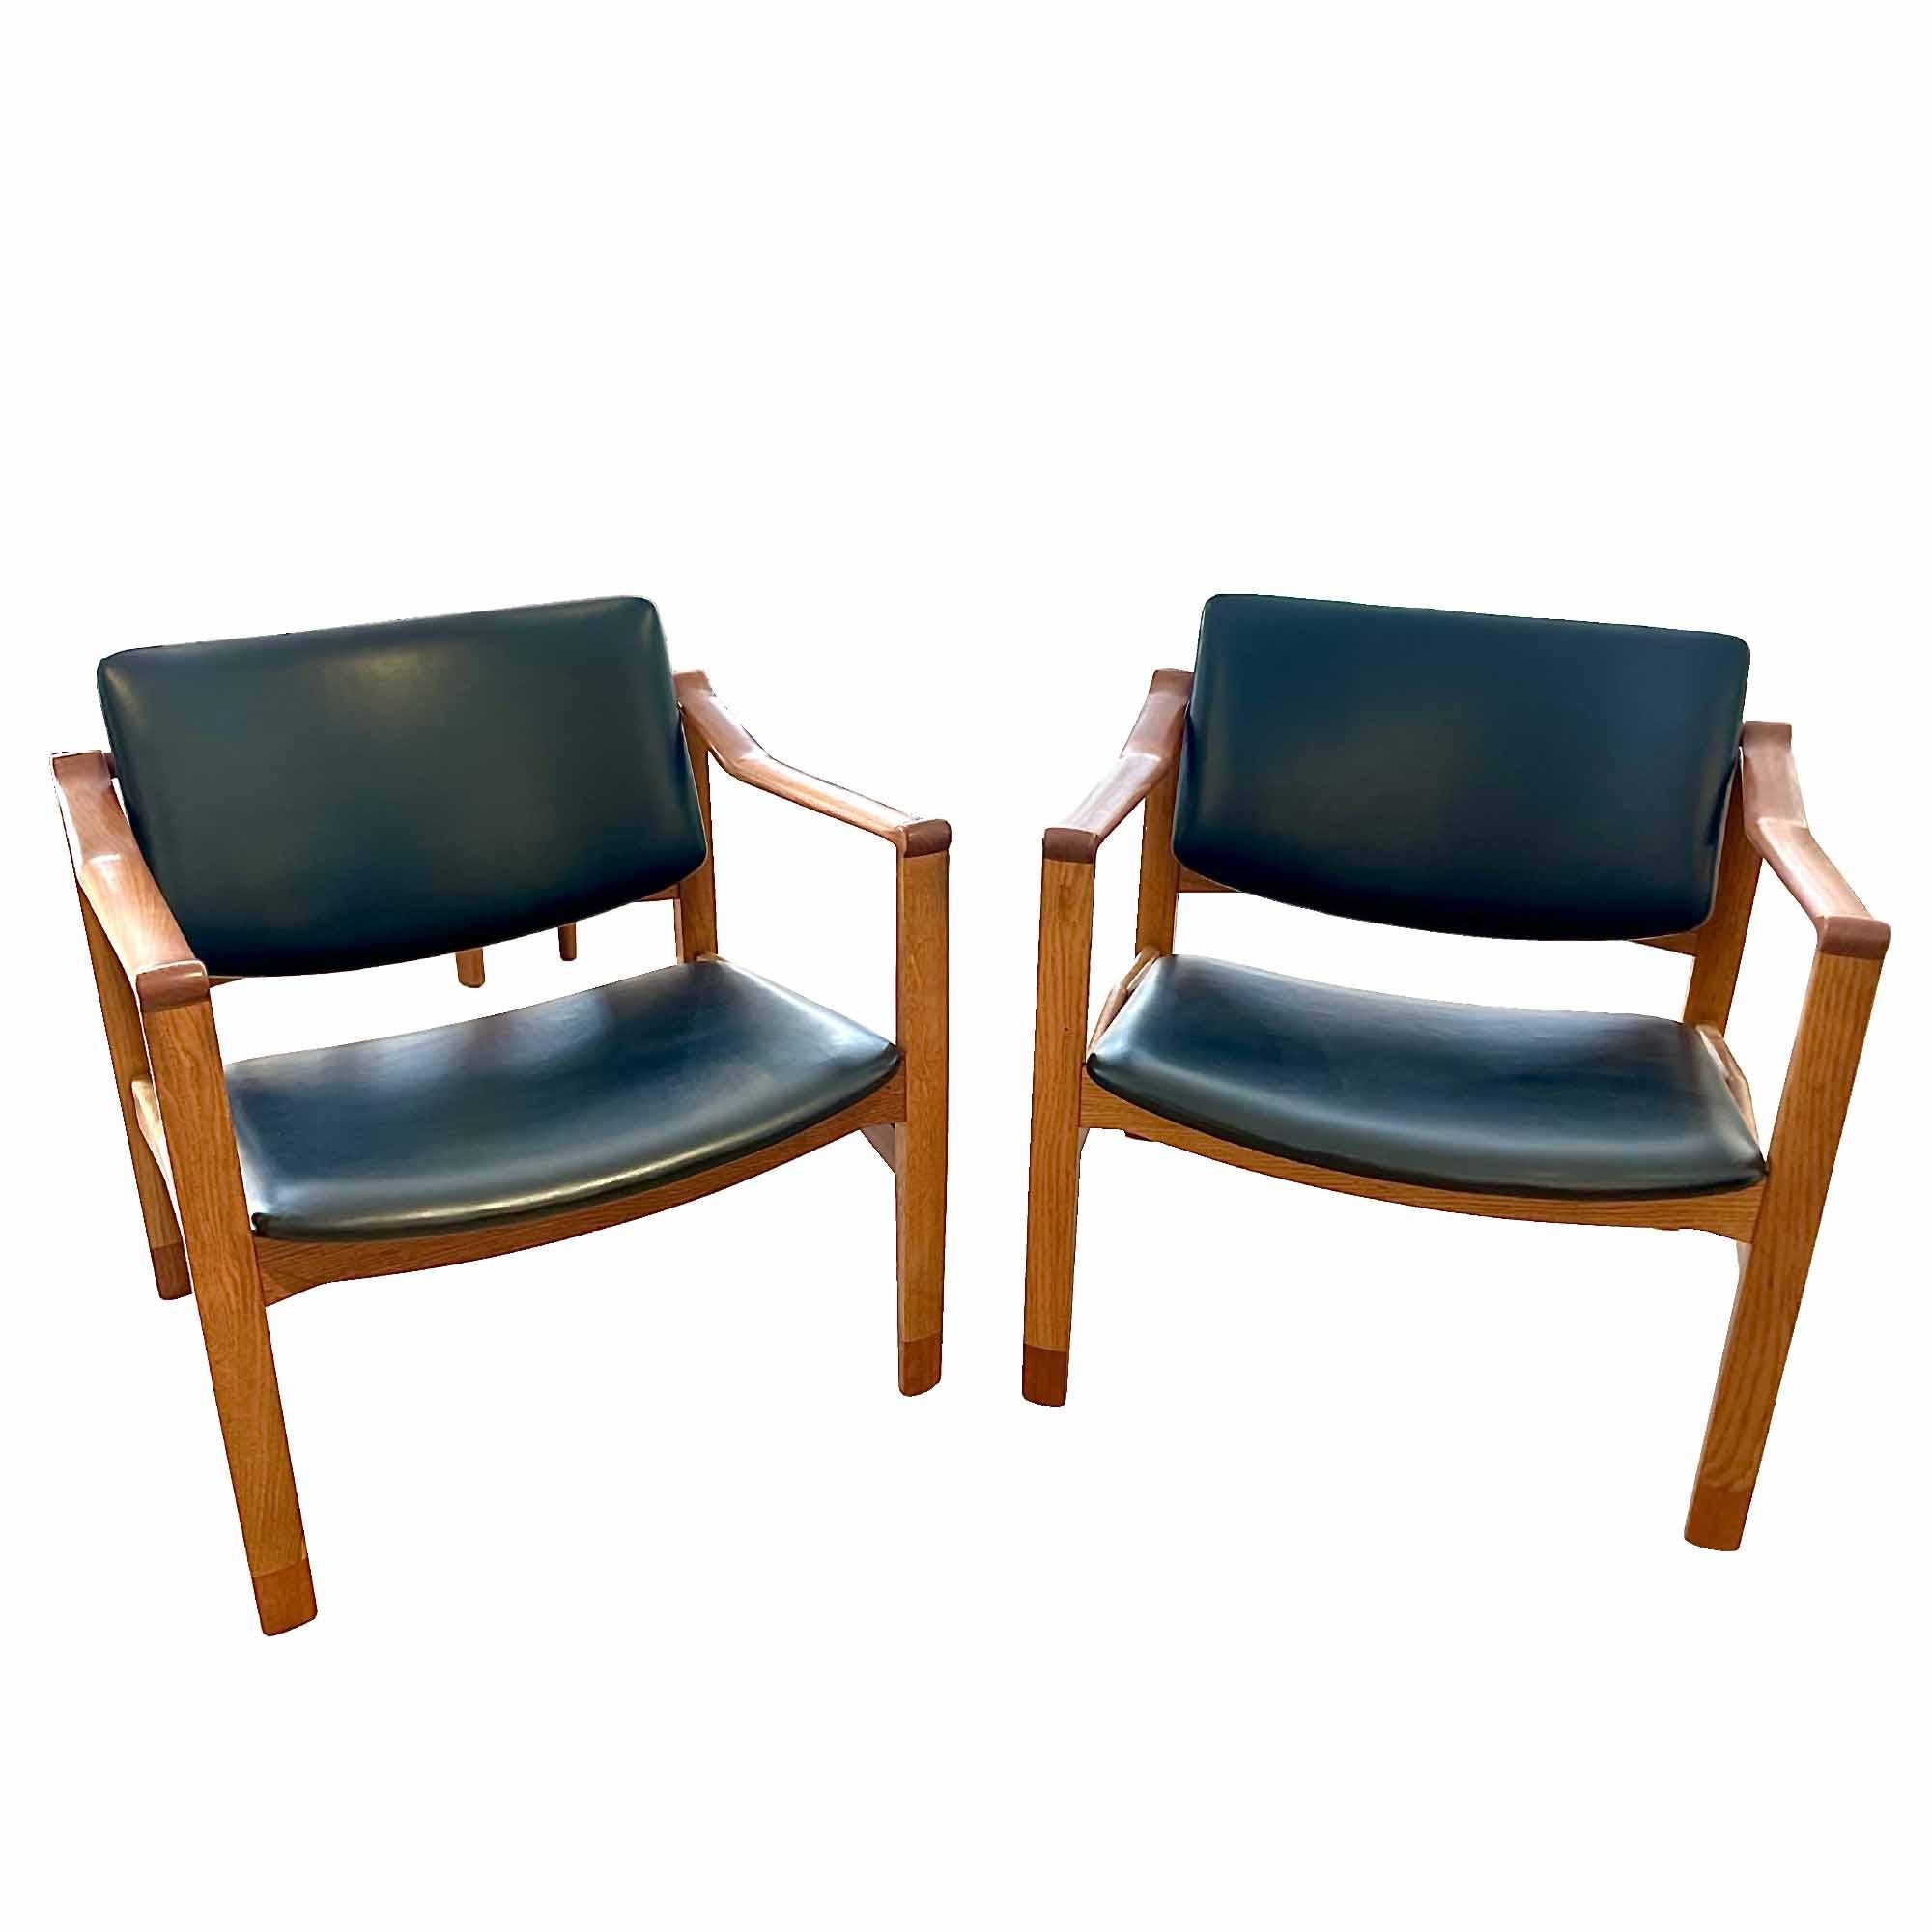 20th Century Pair of Rare Vintage Launge Chairs by William Watting, design 1950's For Sale